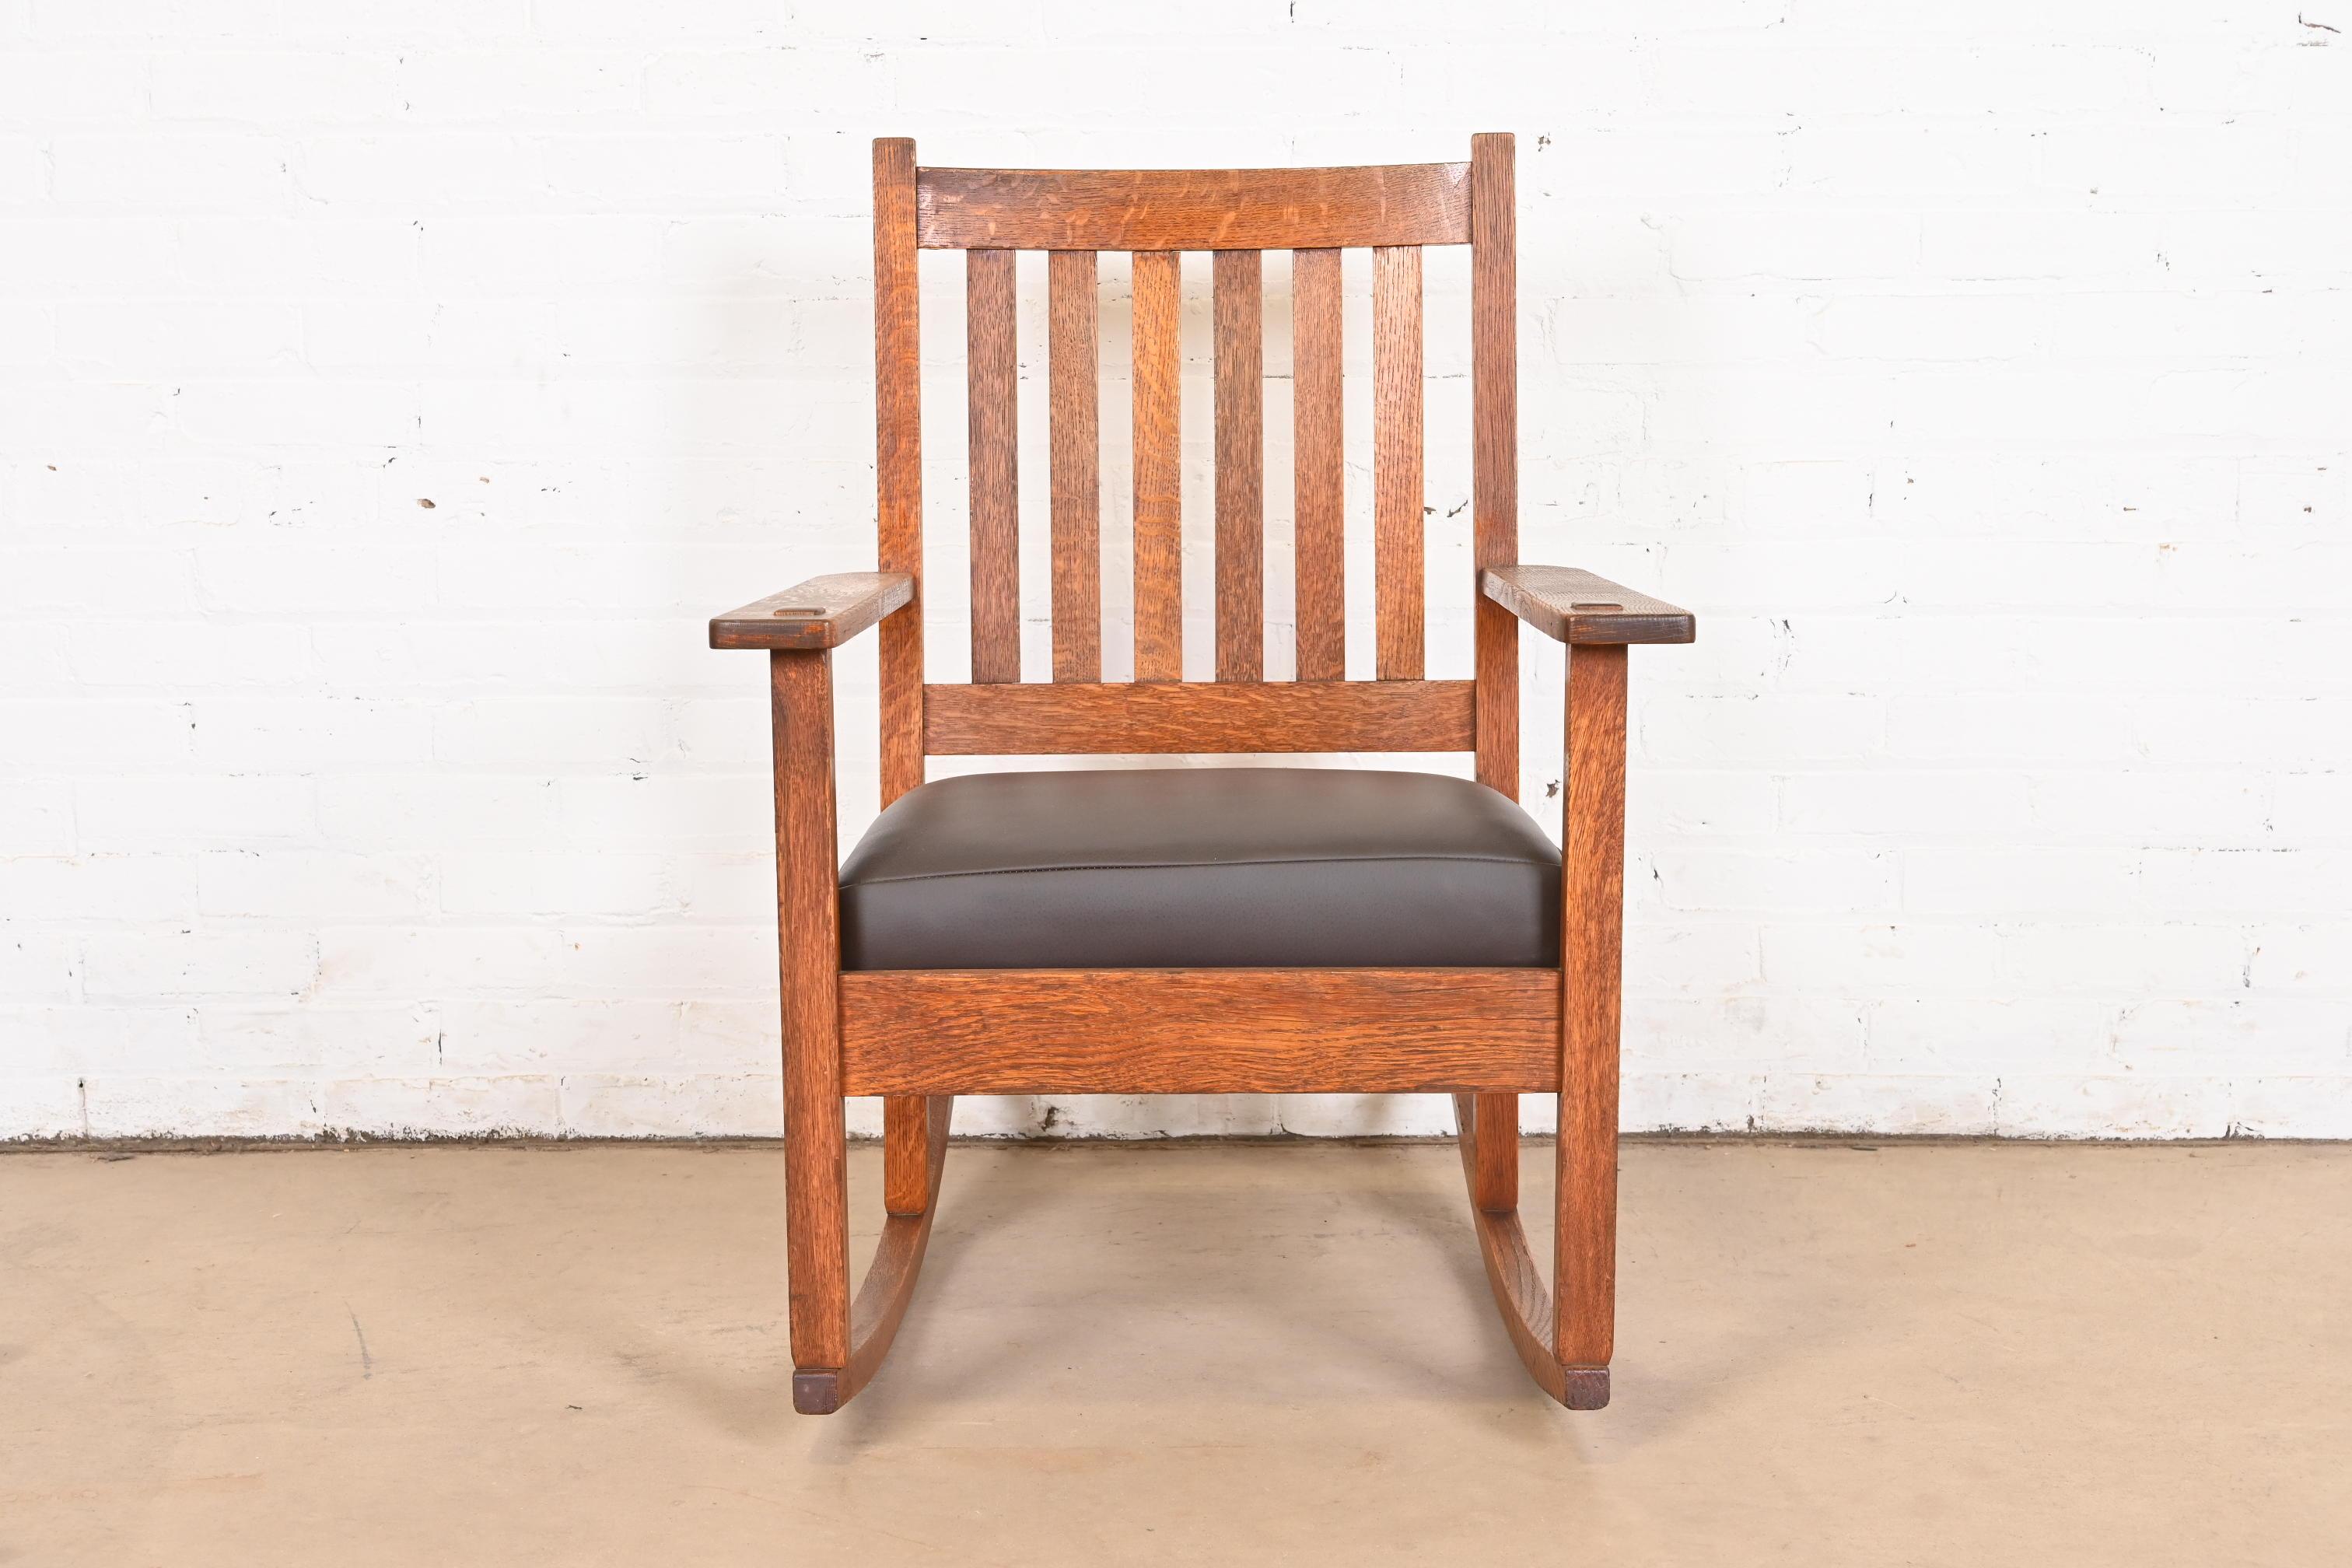 Leather Stickley Brothers Antique Mission Oak Arts & Crafts Rocking Chair, Circa 1900 For Sale